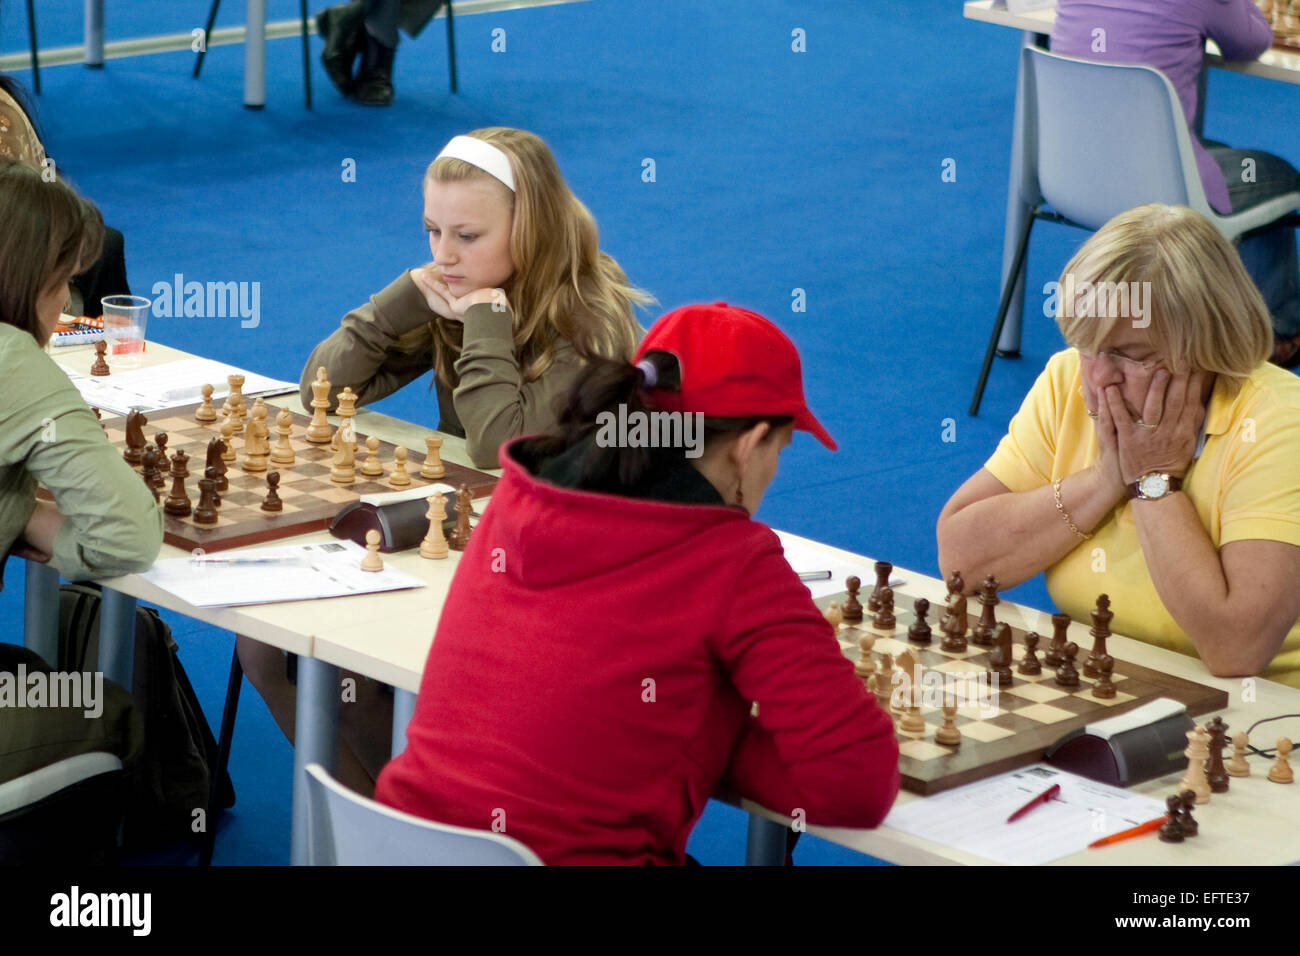 Lara Stock (left) and Vlasta Macek (right) compete in Croatia chess team during 2006 Chess Olympiad in Turin, Italy Stock Photo